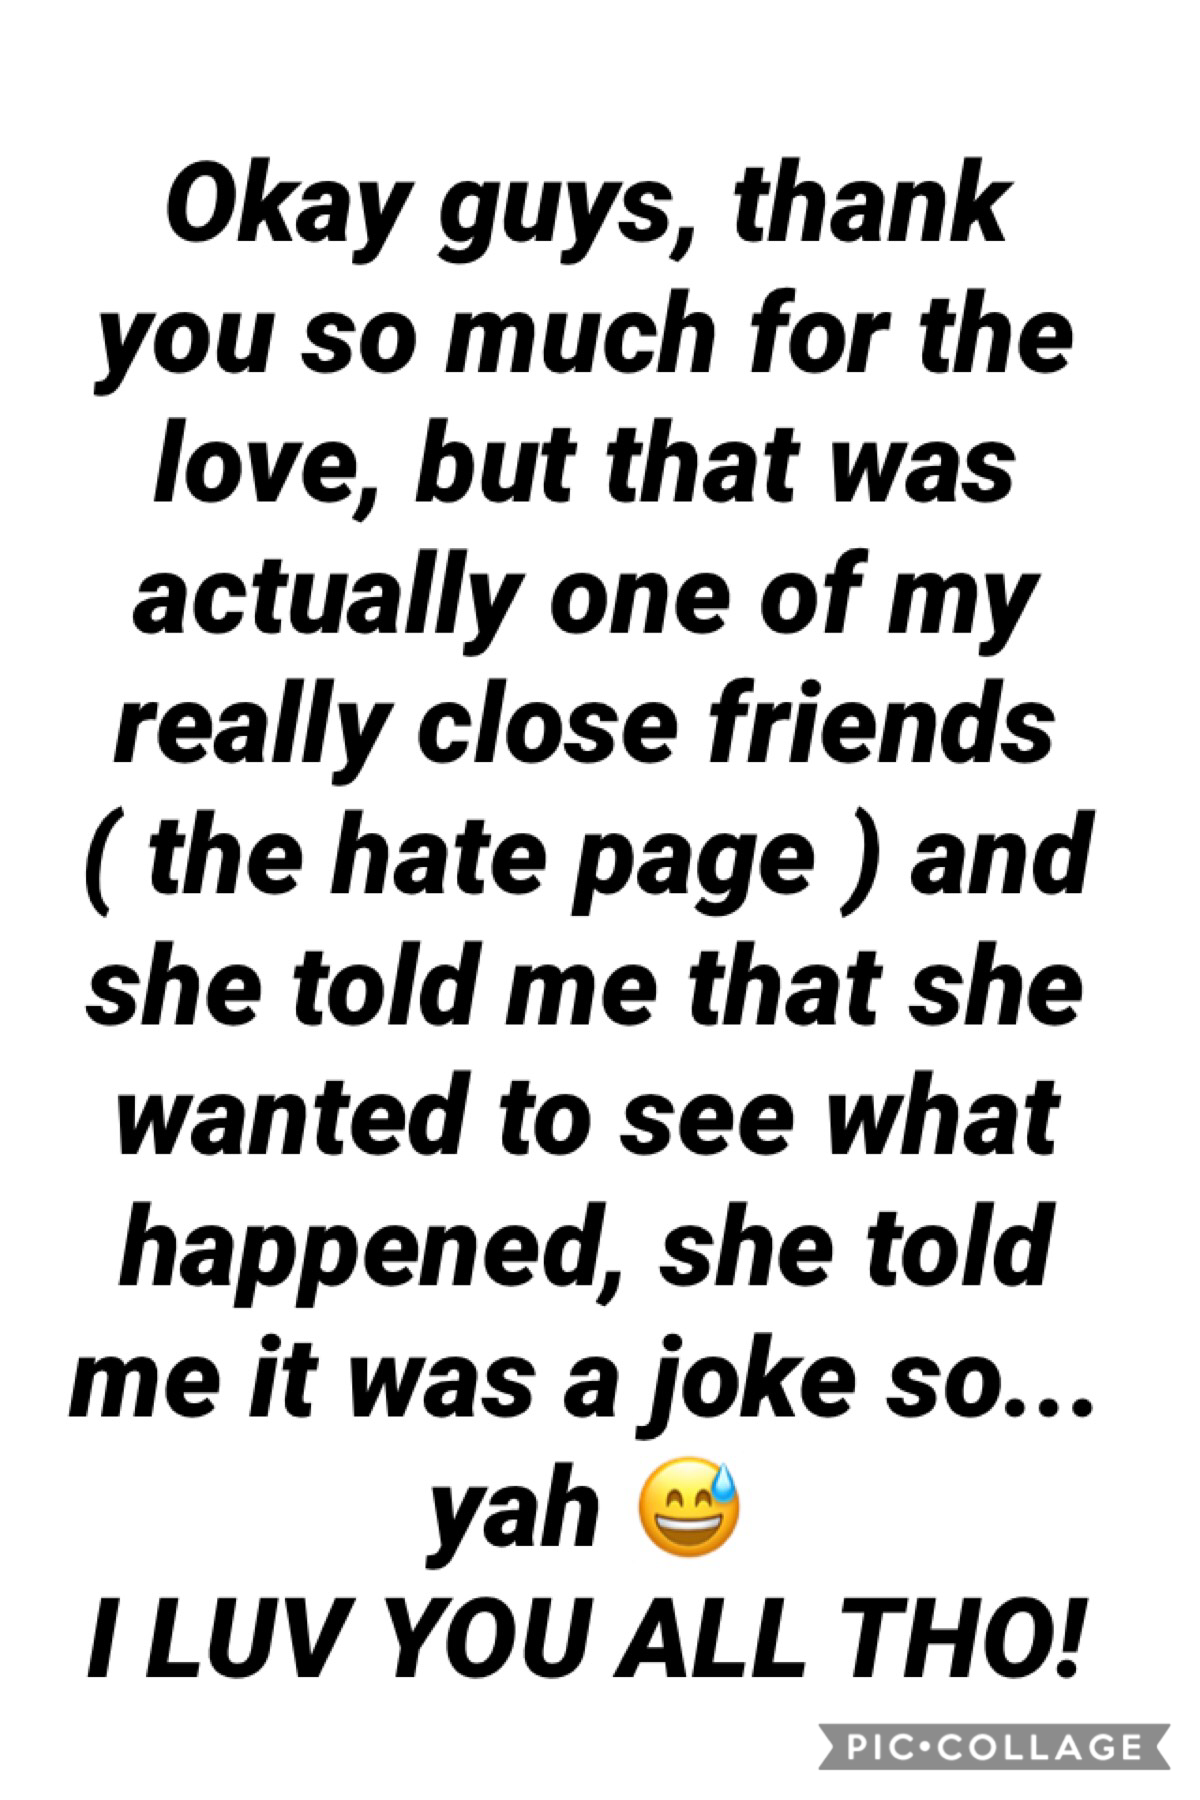 Plz don’t hate me, she just wanted to see what happens!